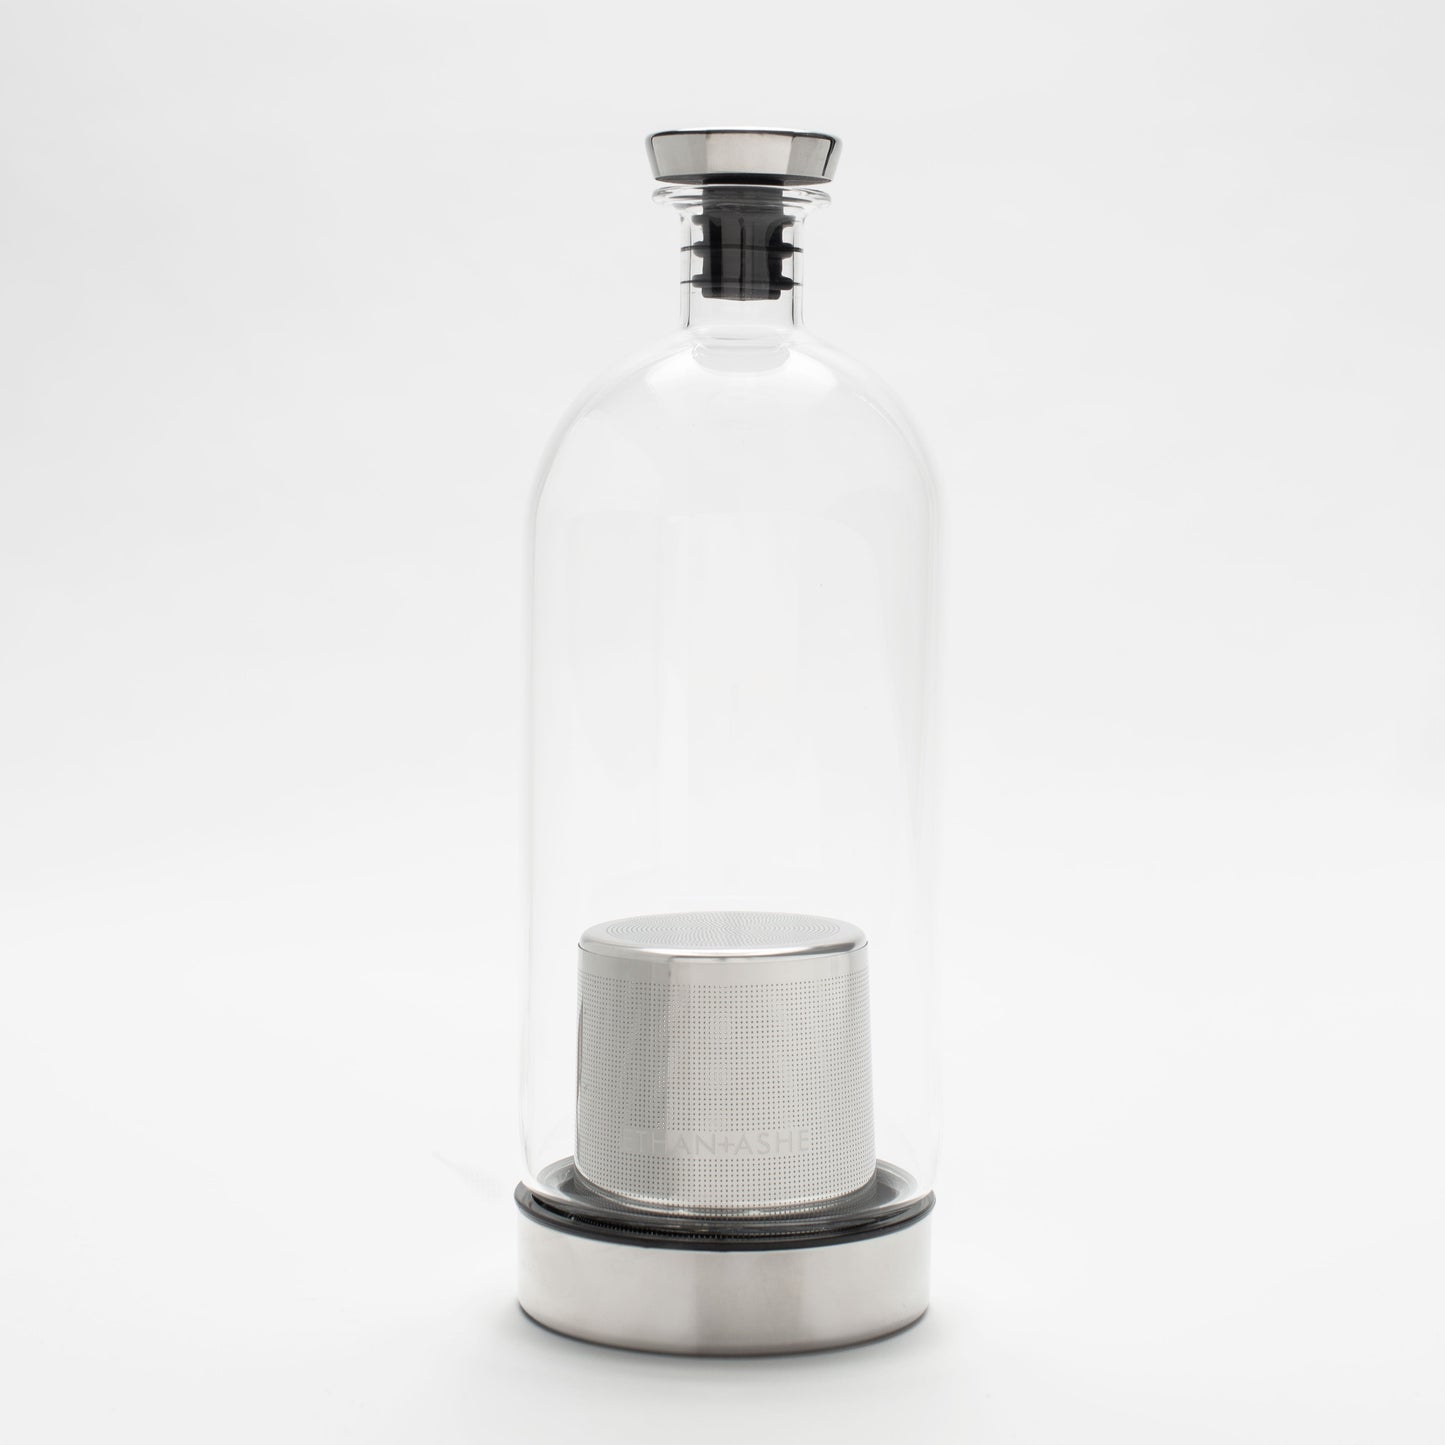 Alkemista Infusion Vessel by Ethan+Ashe